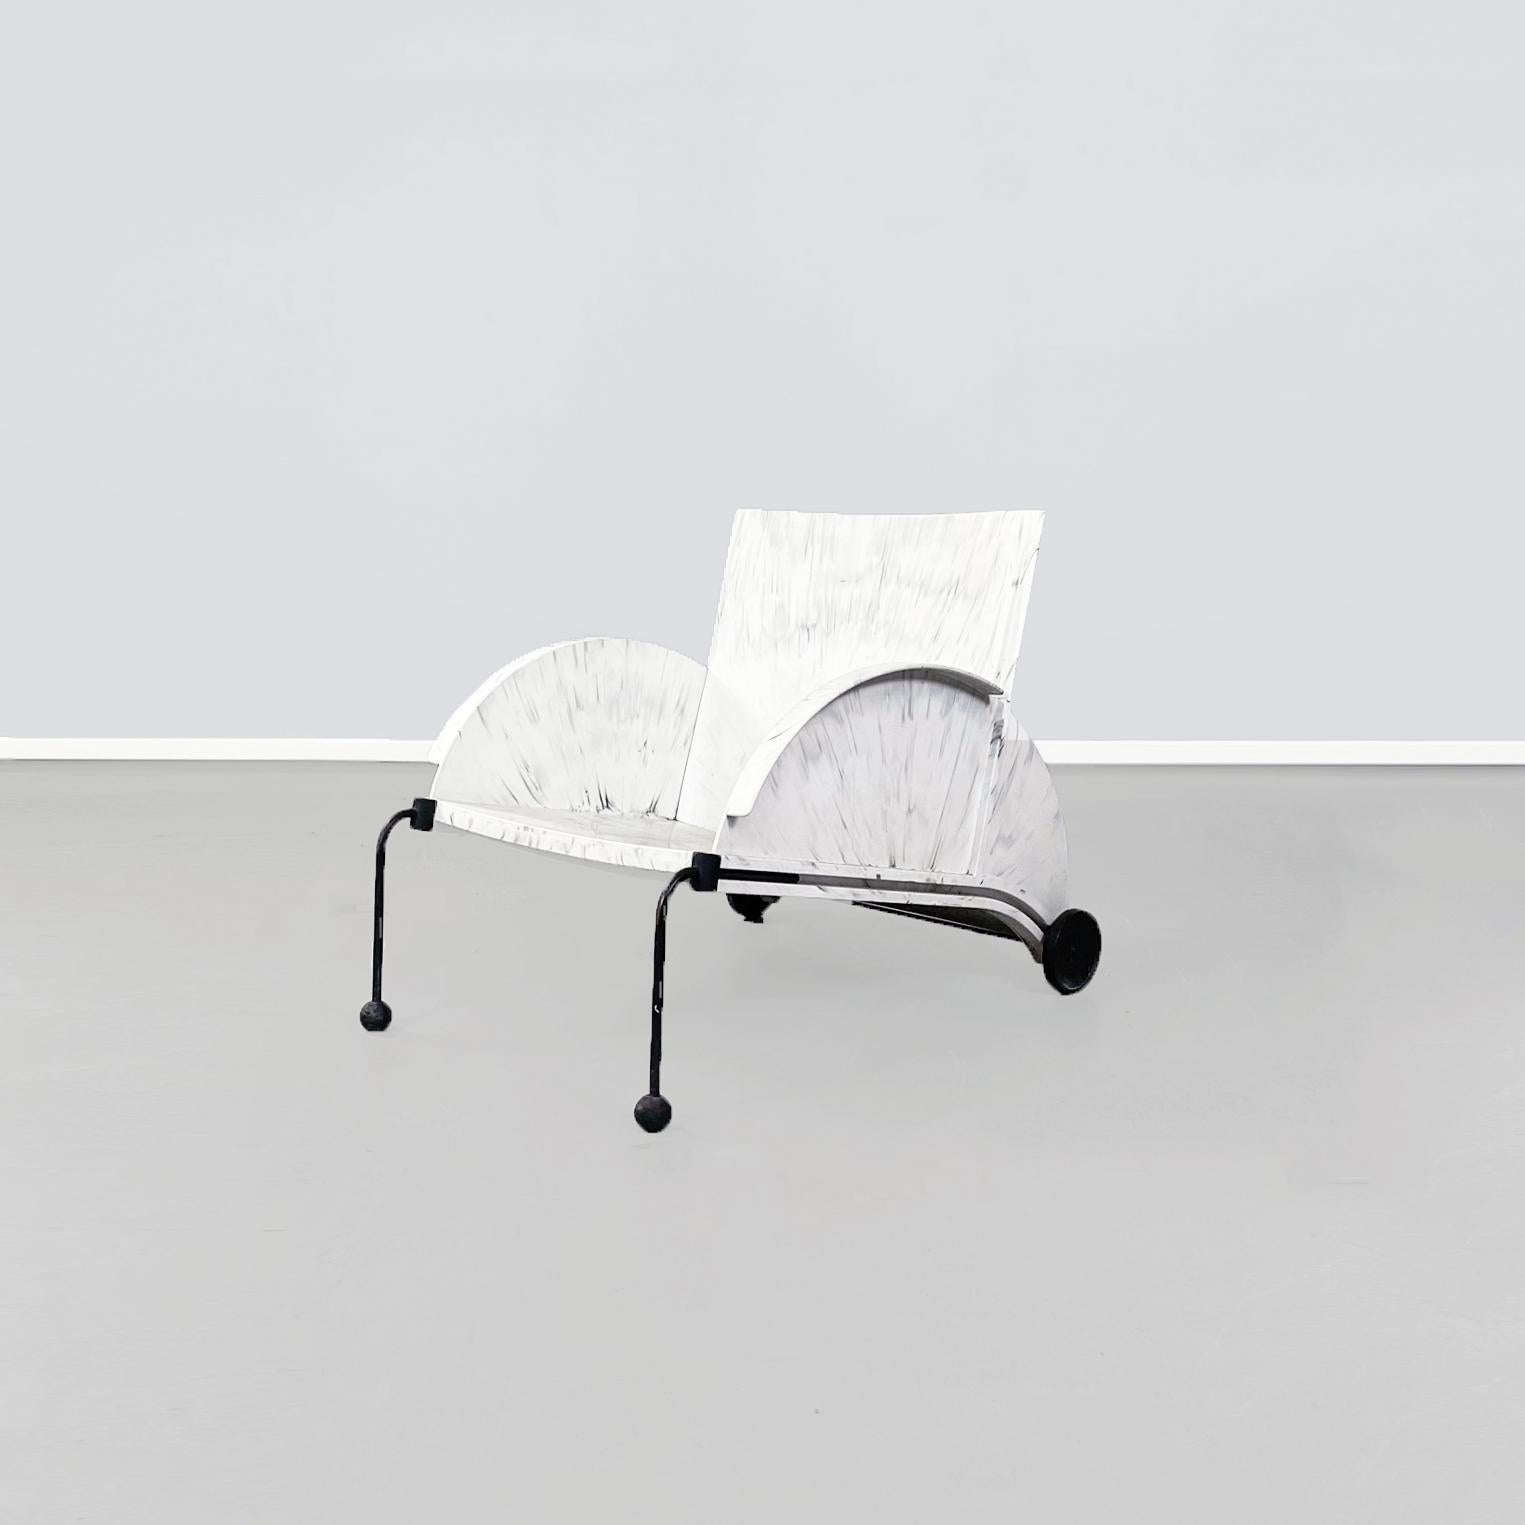 Italian mid-century armchair or lounge chair 4841 by Anna Castelli Ferrieri for Kartell, 80s
Lounge chair made of a mix of recycled polyethylene materials, with ball feet on the front and wheels on the back, to change the position of the object